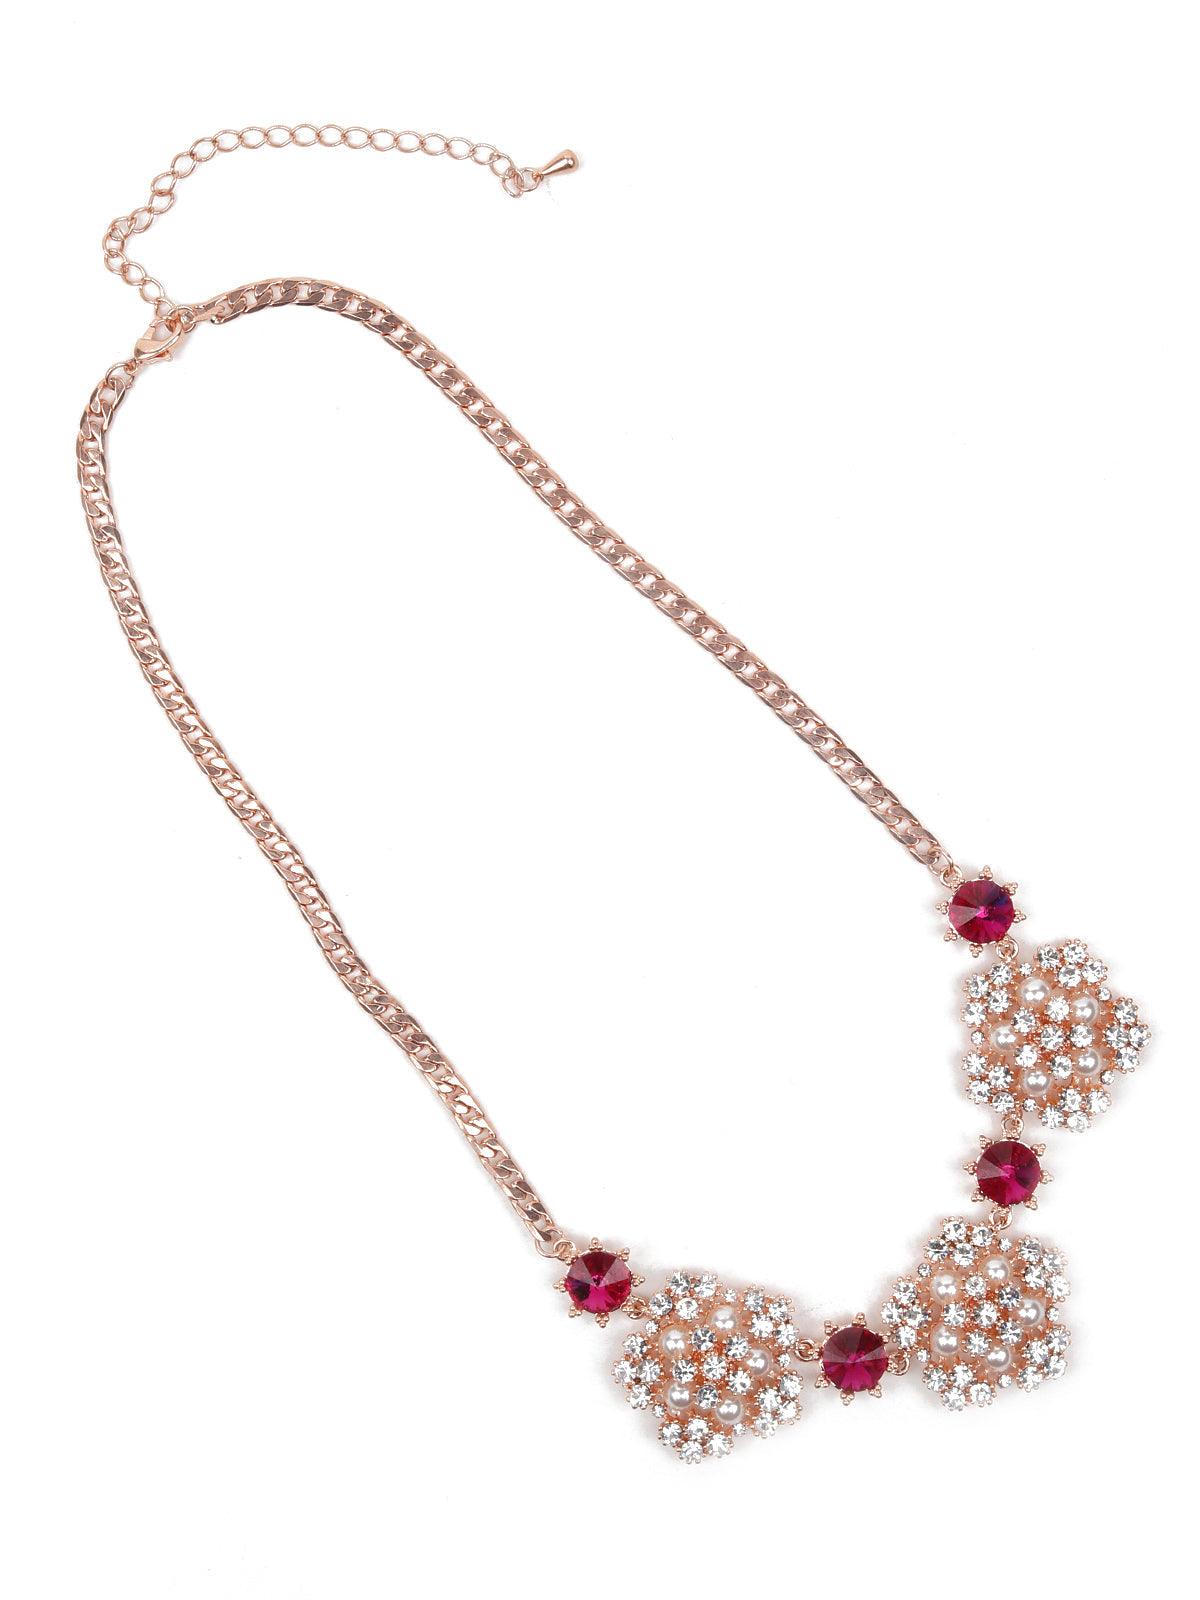 Women's Sparkling Gold Tone Necklace With Red Coloured Stones - Odette